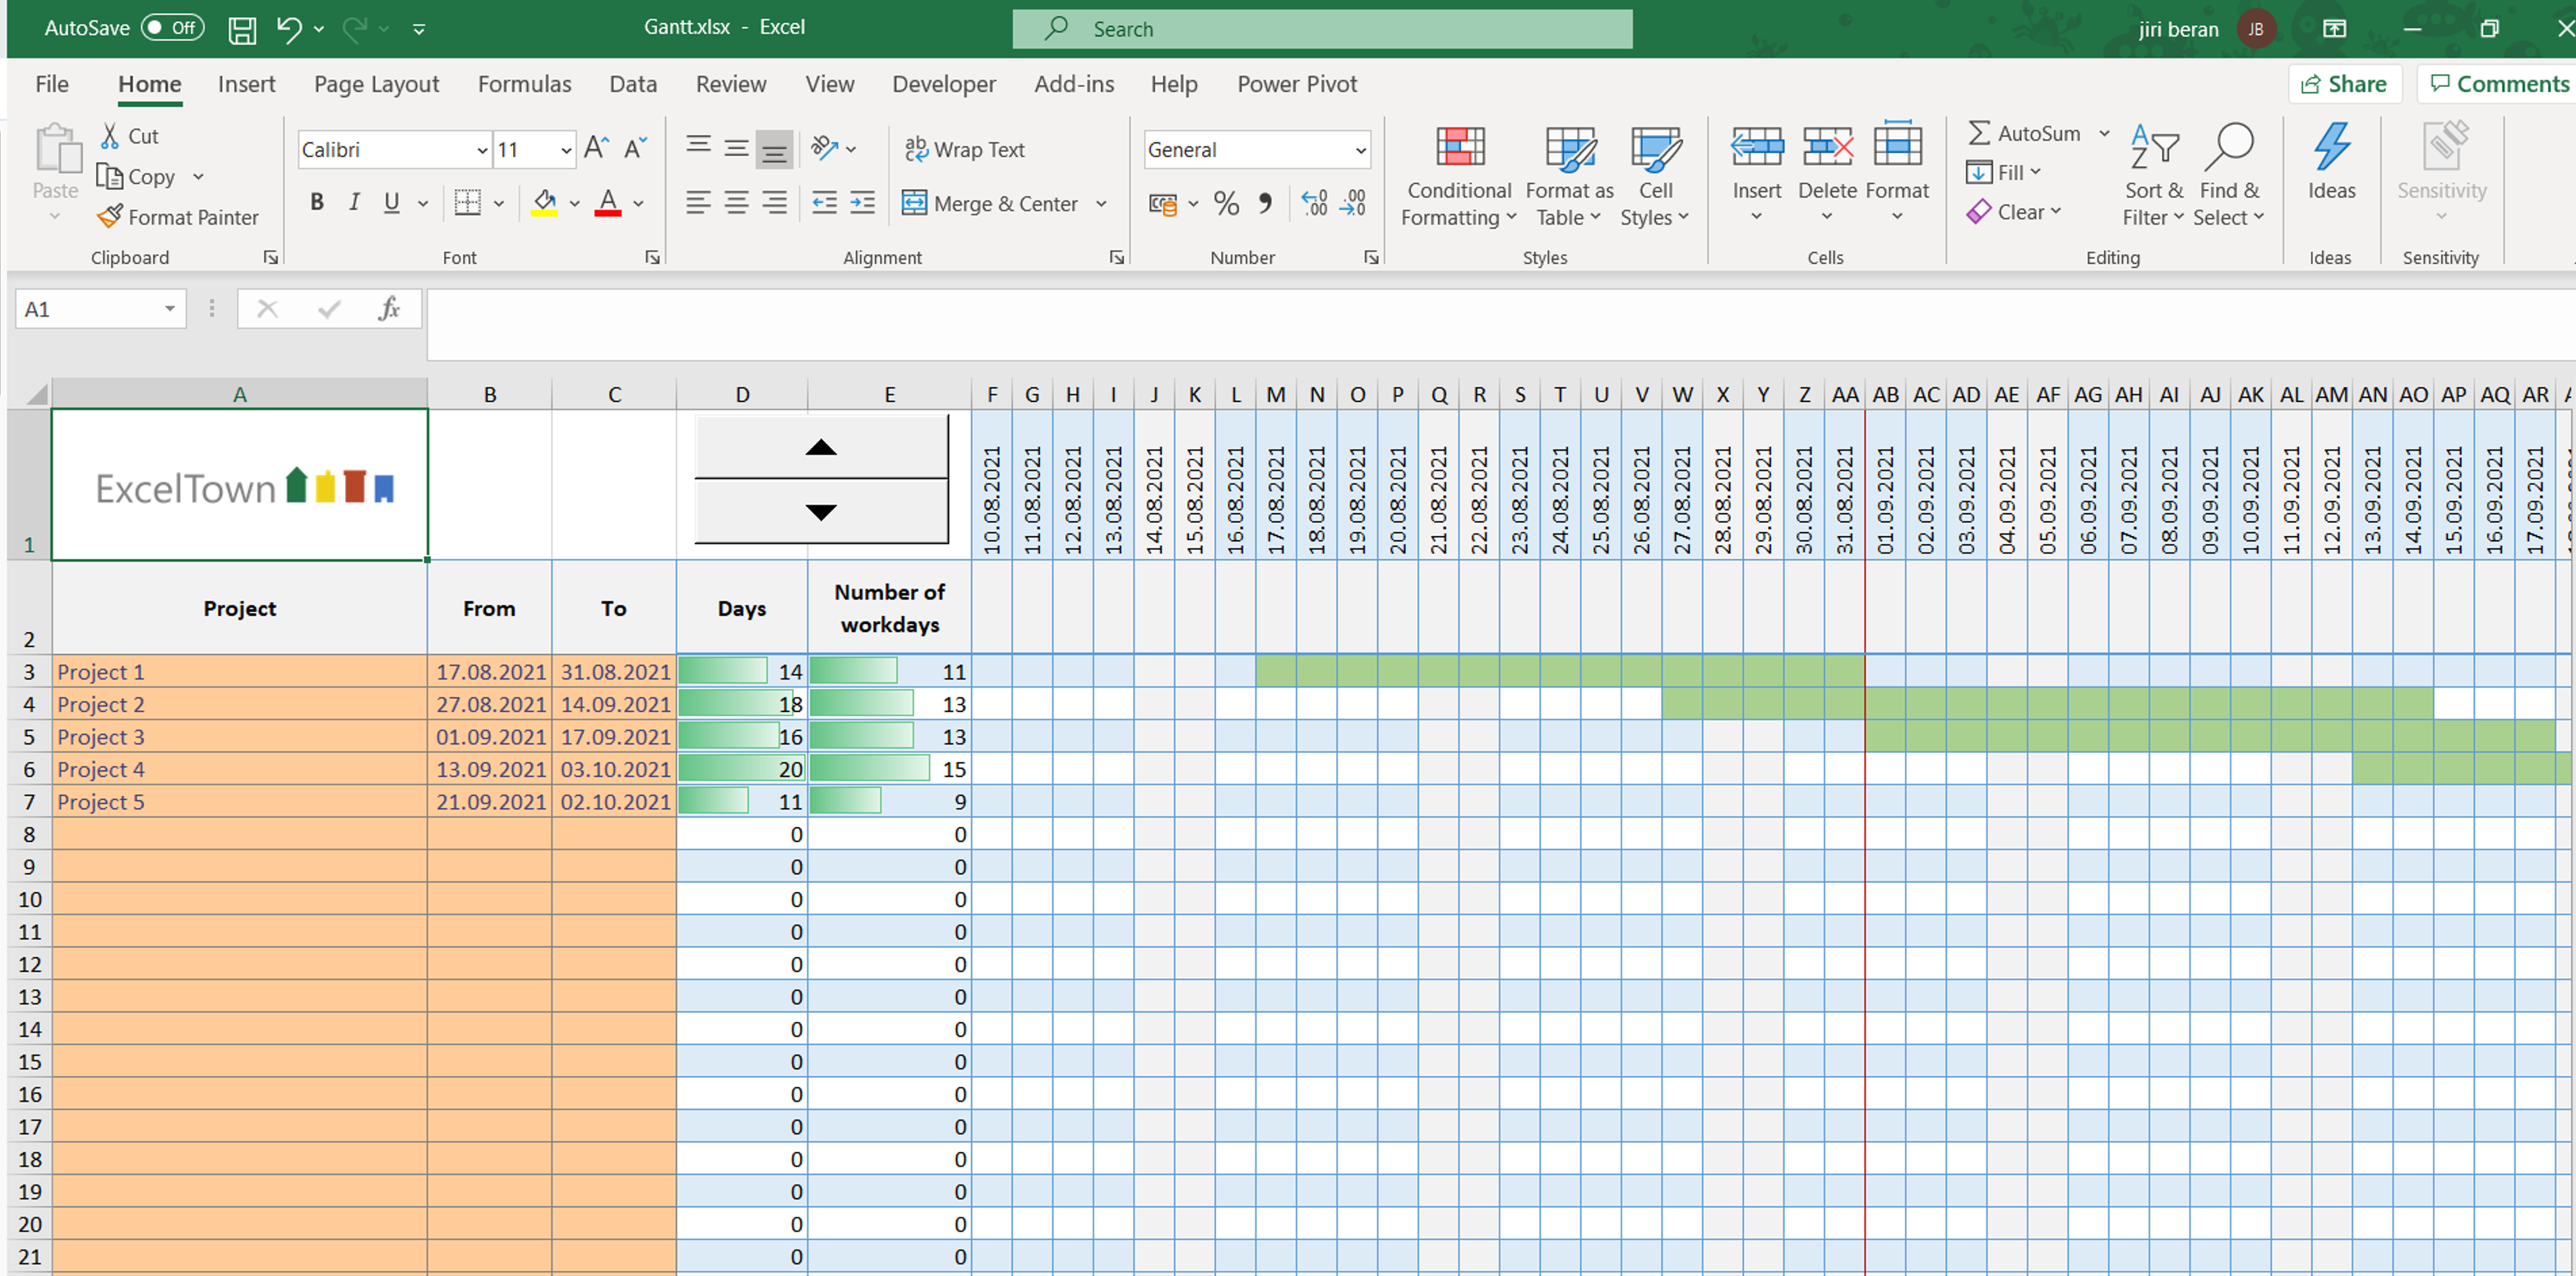 How To Make A Simple Gantt Chart - Printable Templates